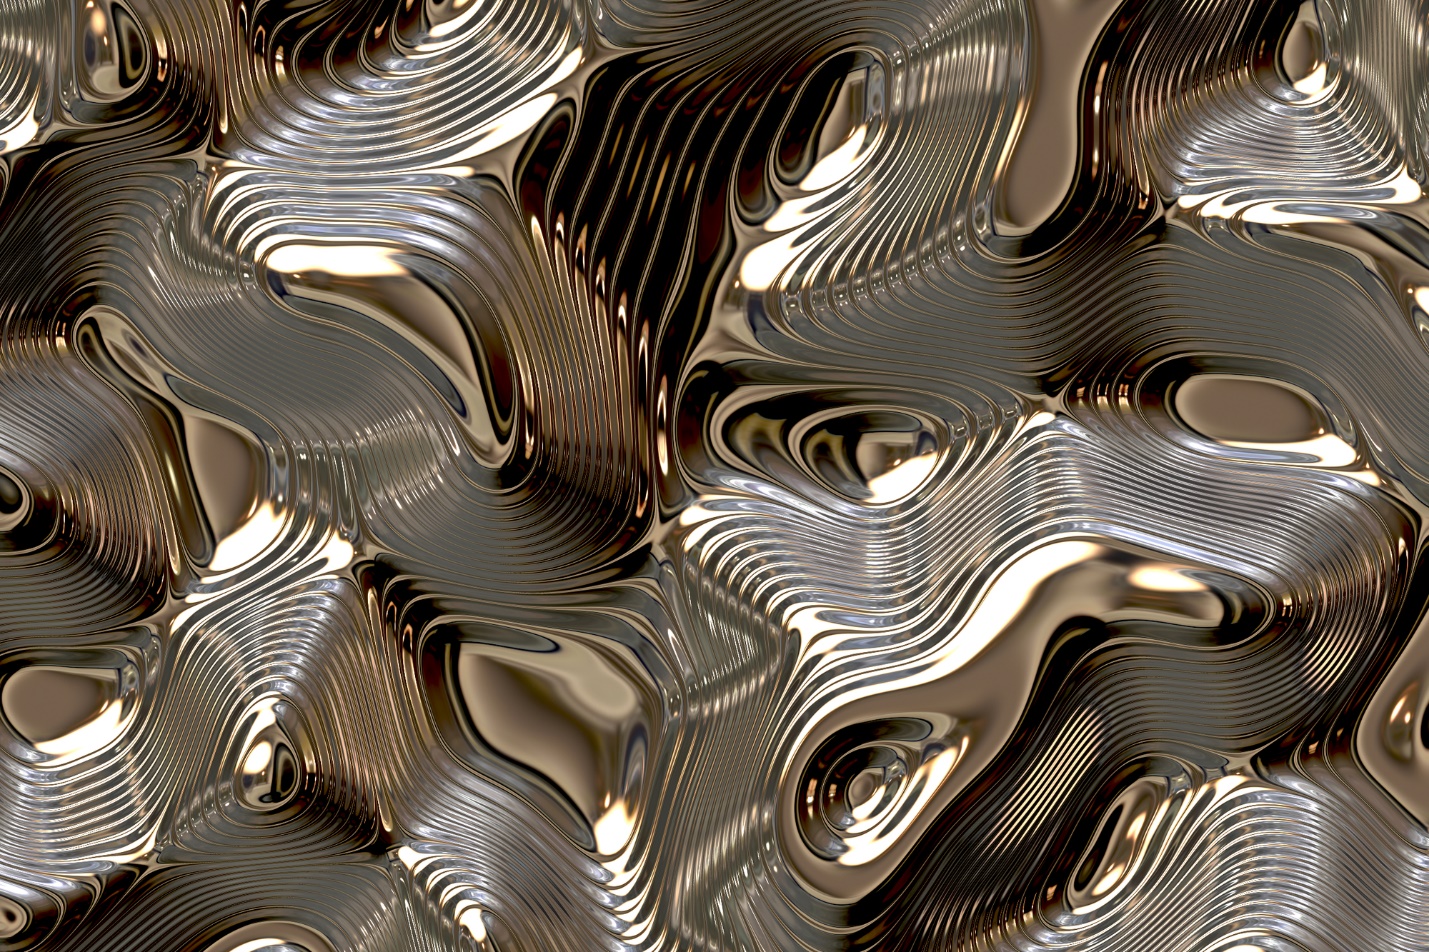 A close up of a metal surface

Description automatically generated